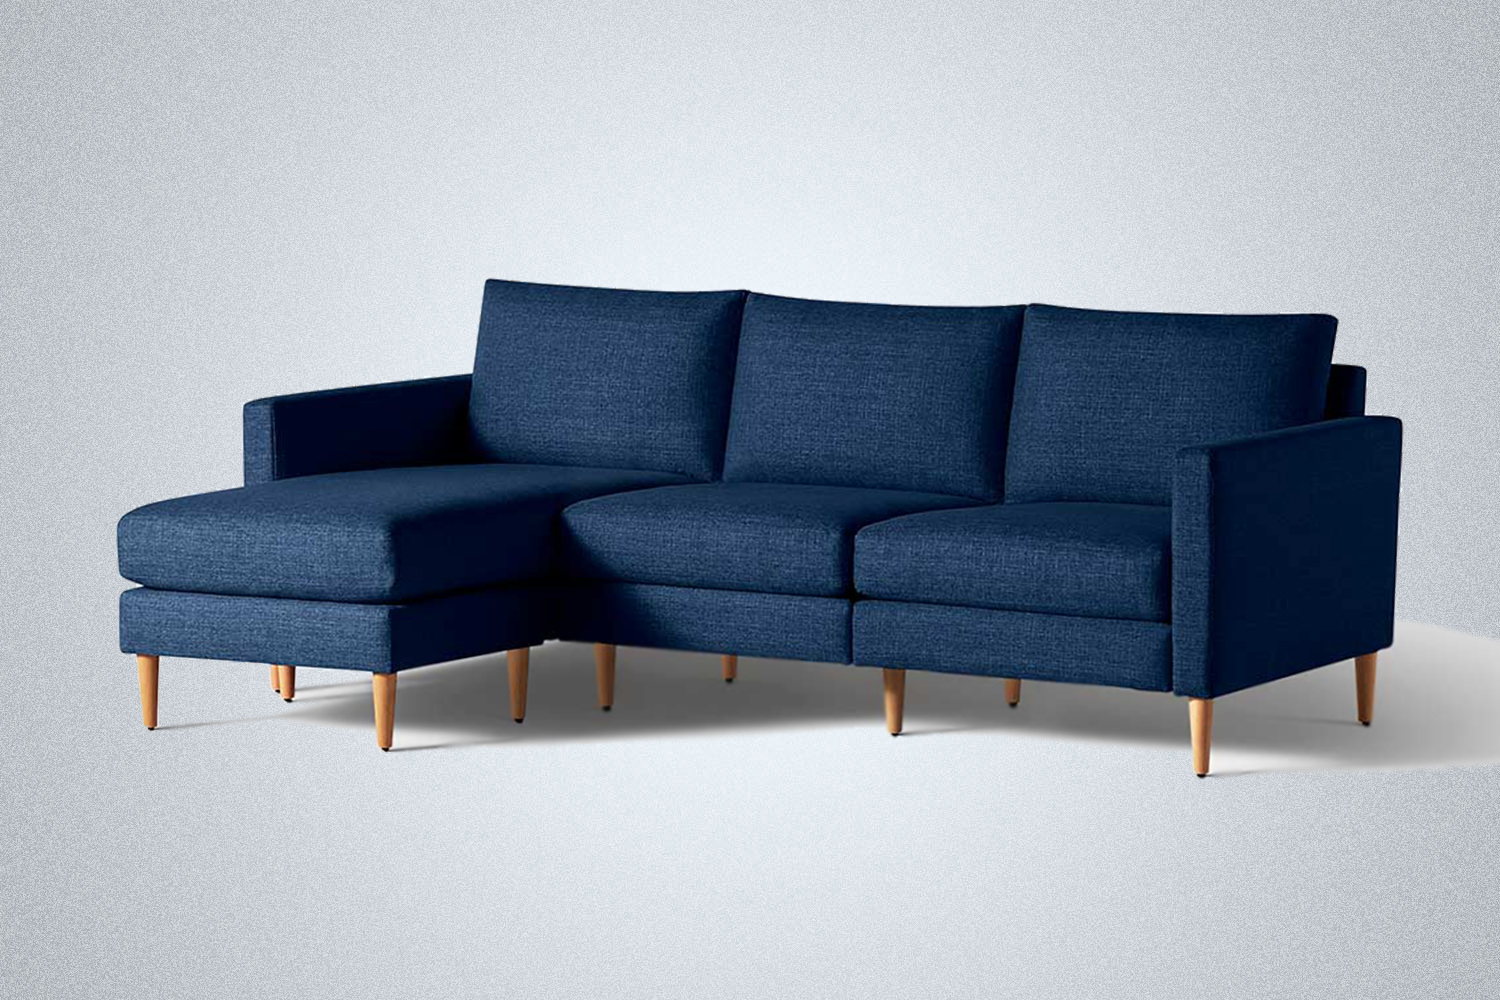 A blue modular sofa from Allform with a chaise on the end